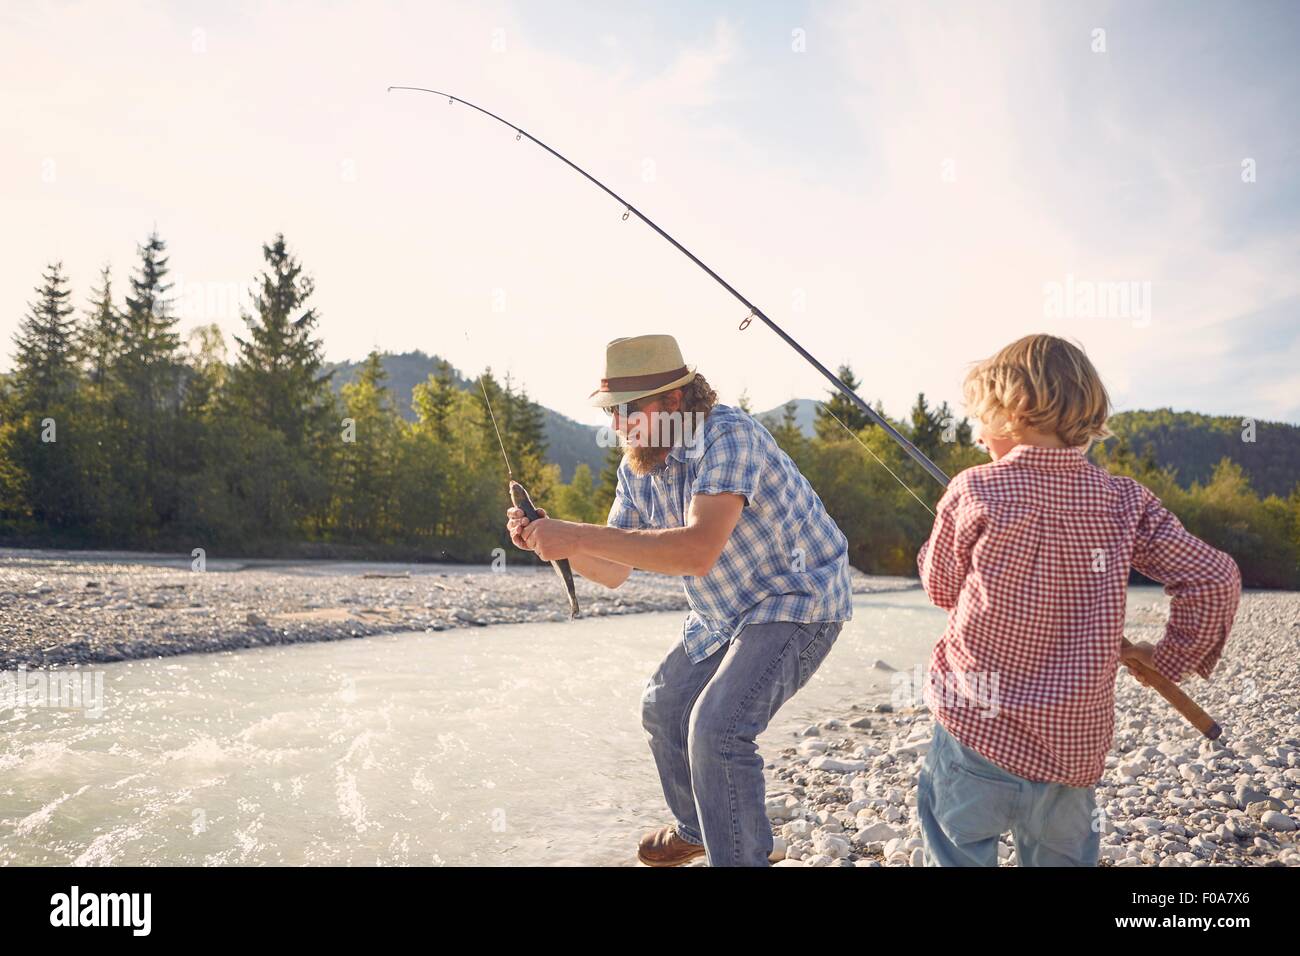 Mid adult man and boy next to river using fishing rod to catch fish Stock Photo